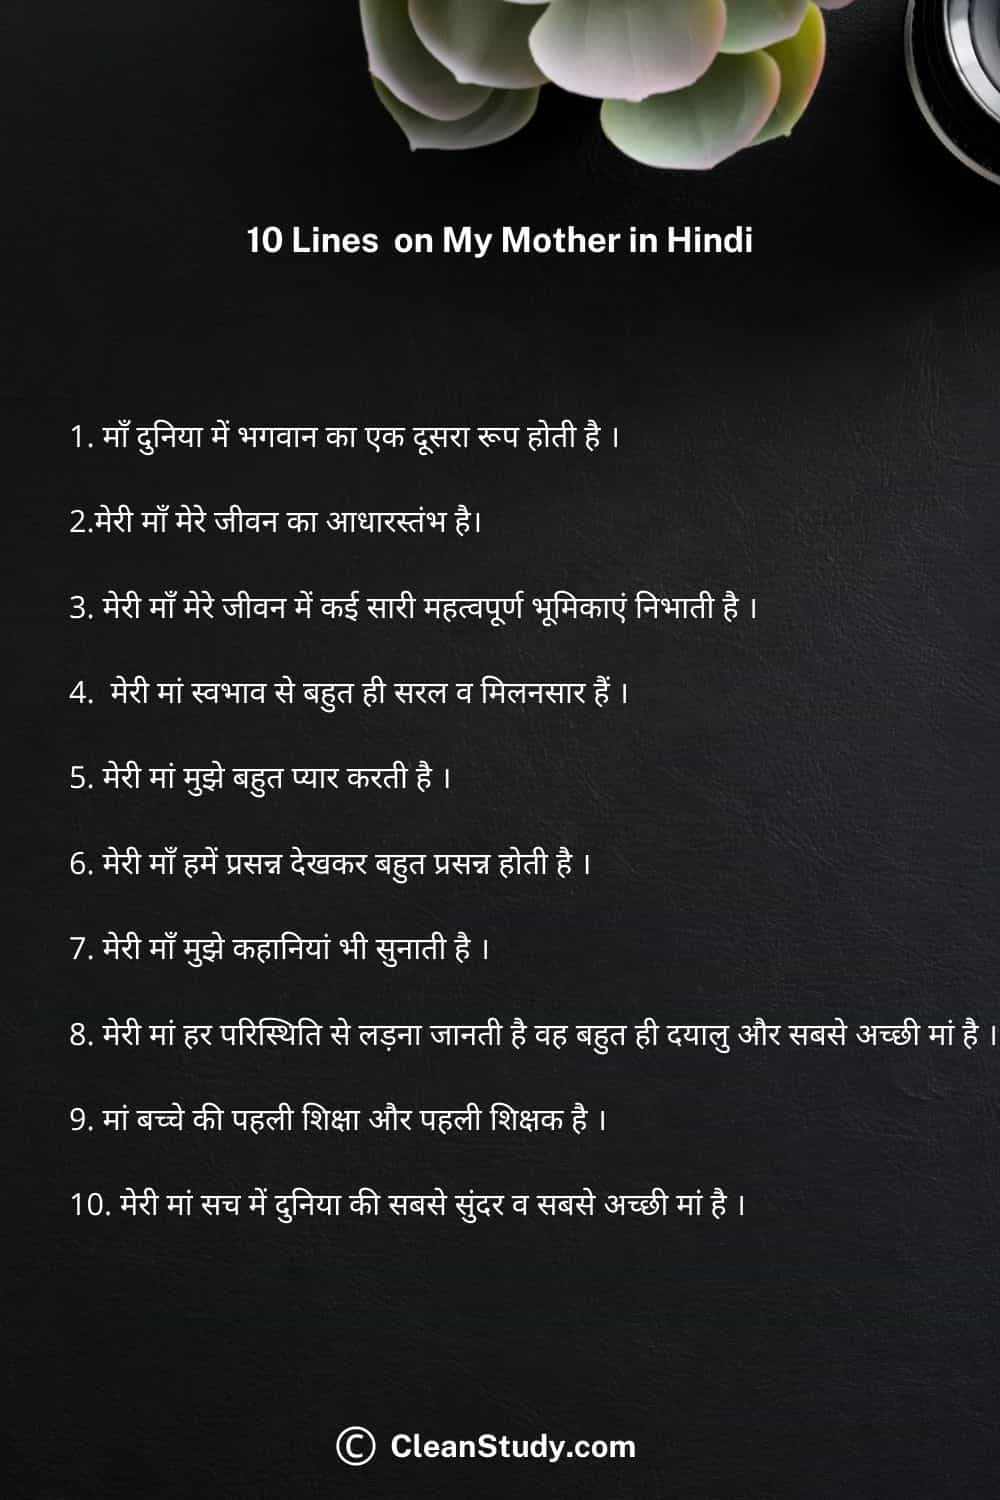 10 lines on mother in hindi